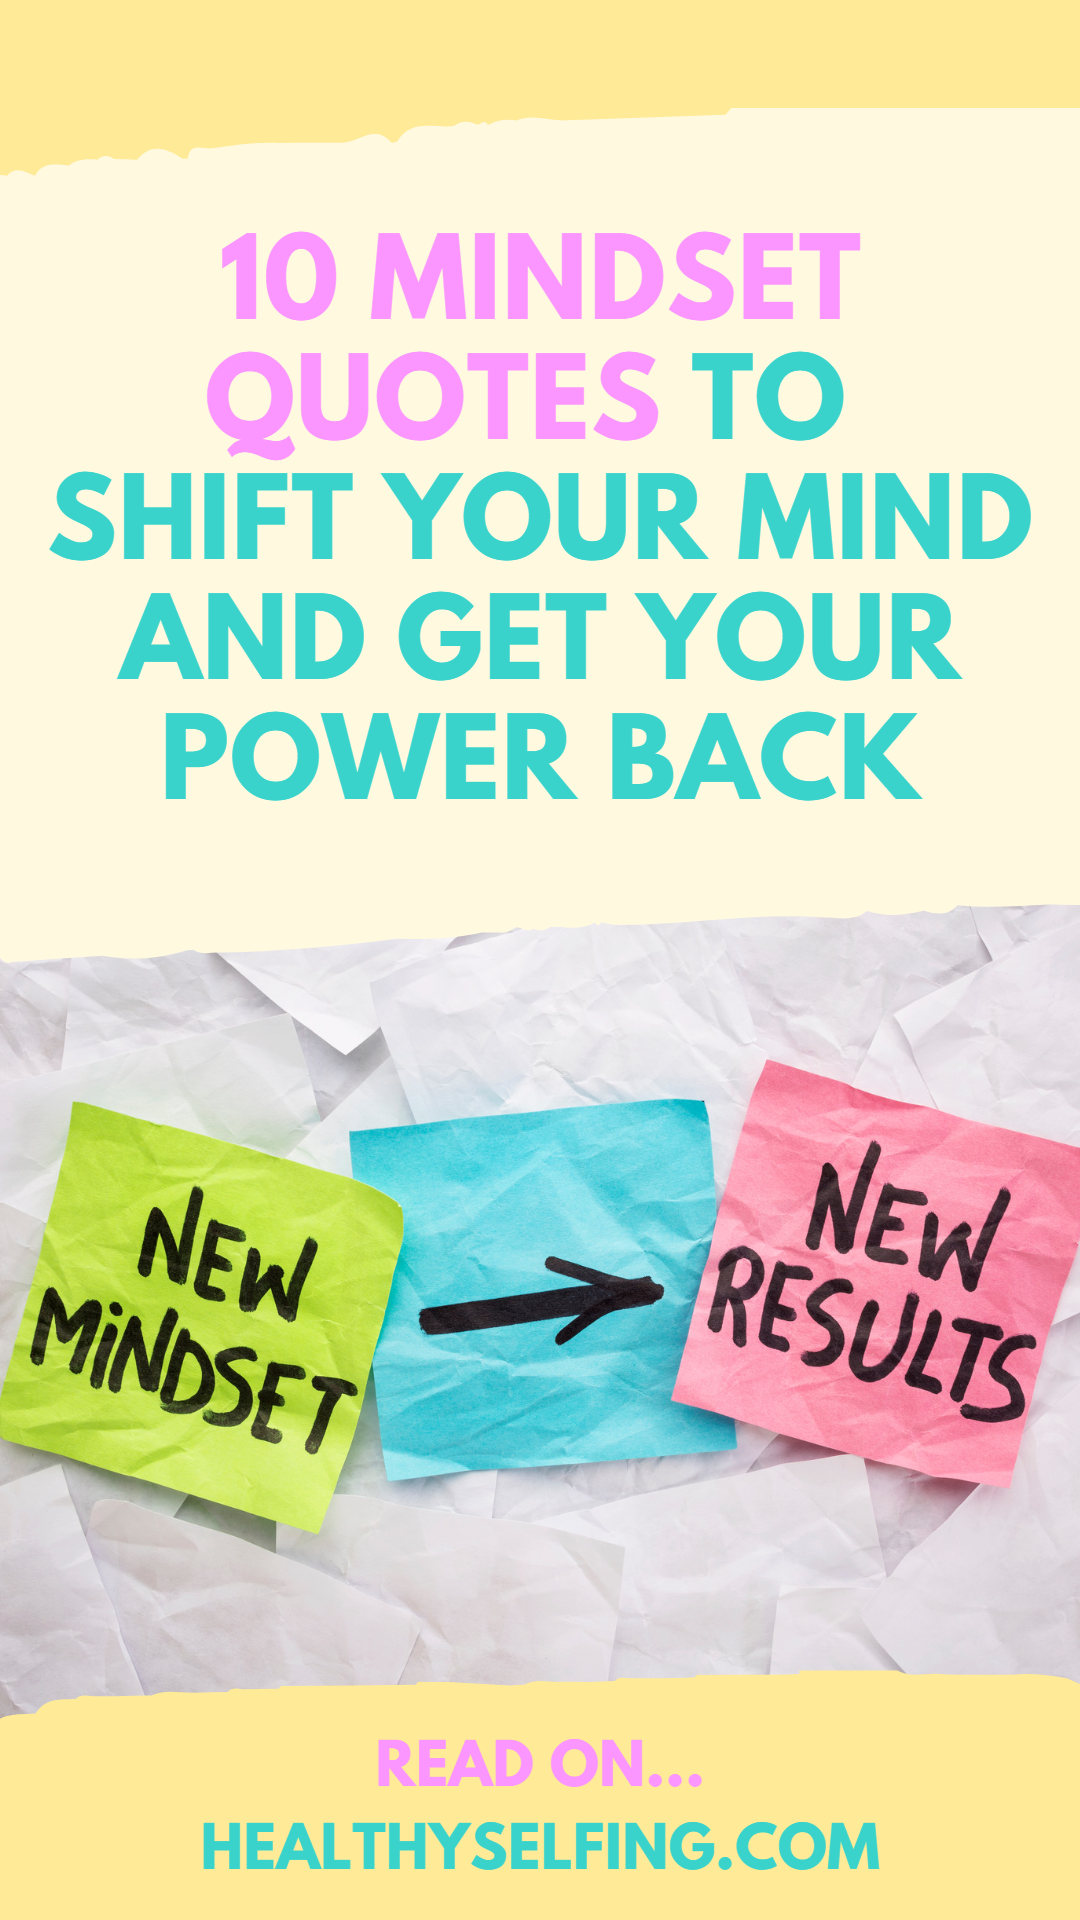 10 Mindset Quotes to Shift Your Mind and Get Your Power Back